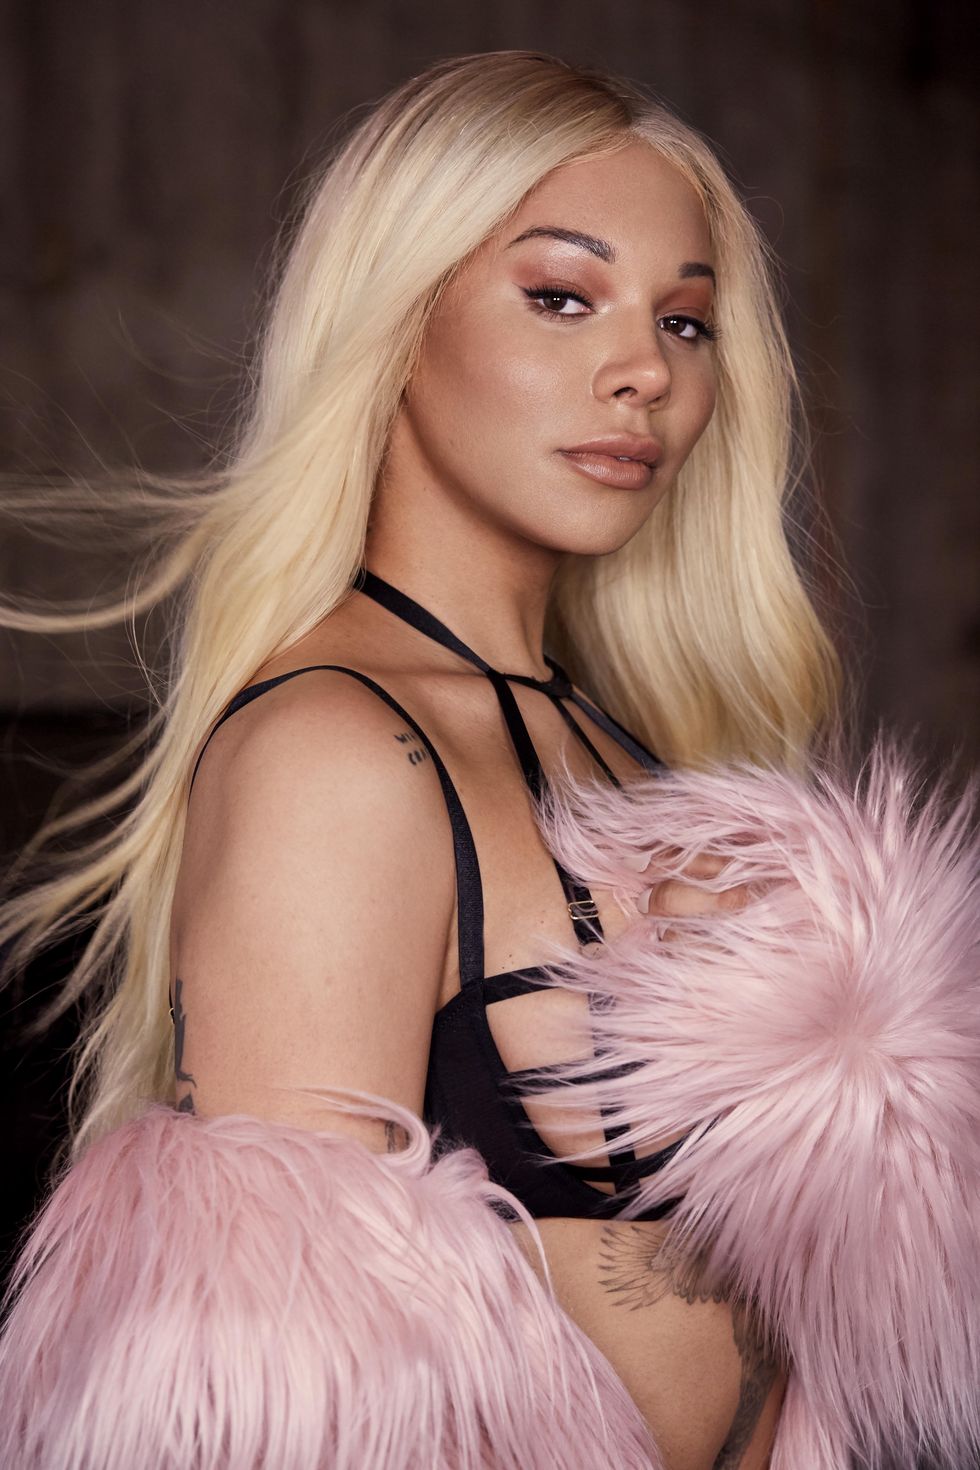 https://hips.hearstapps.com/hmg-prod/images/munroe-bergdorf-with-pink-pom-pom-bluebella-loveyourself-campaign-1548849417.jpg?crop=1xw:1xh;center,top&resize=980:*